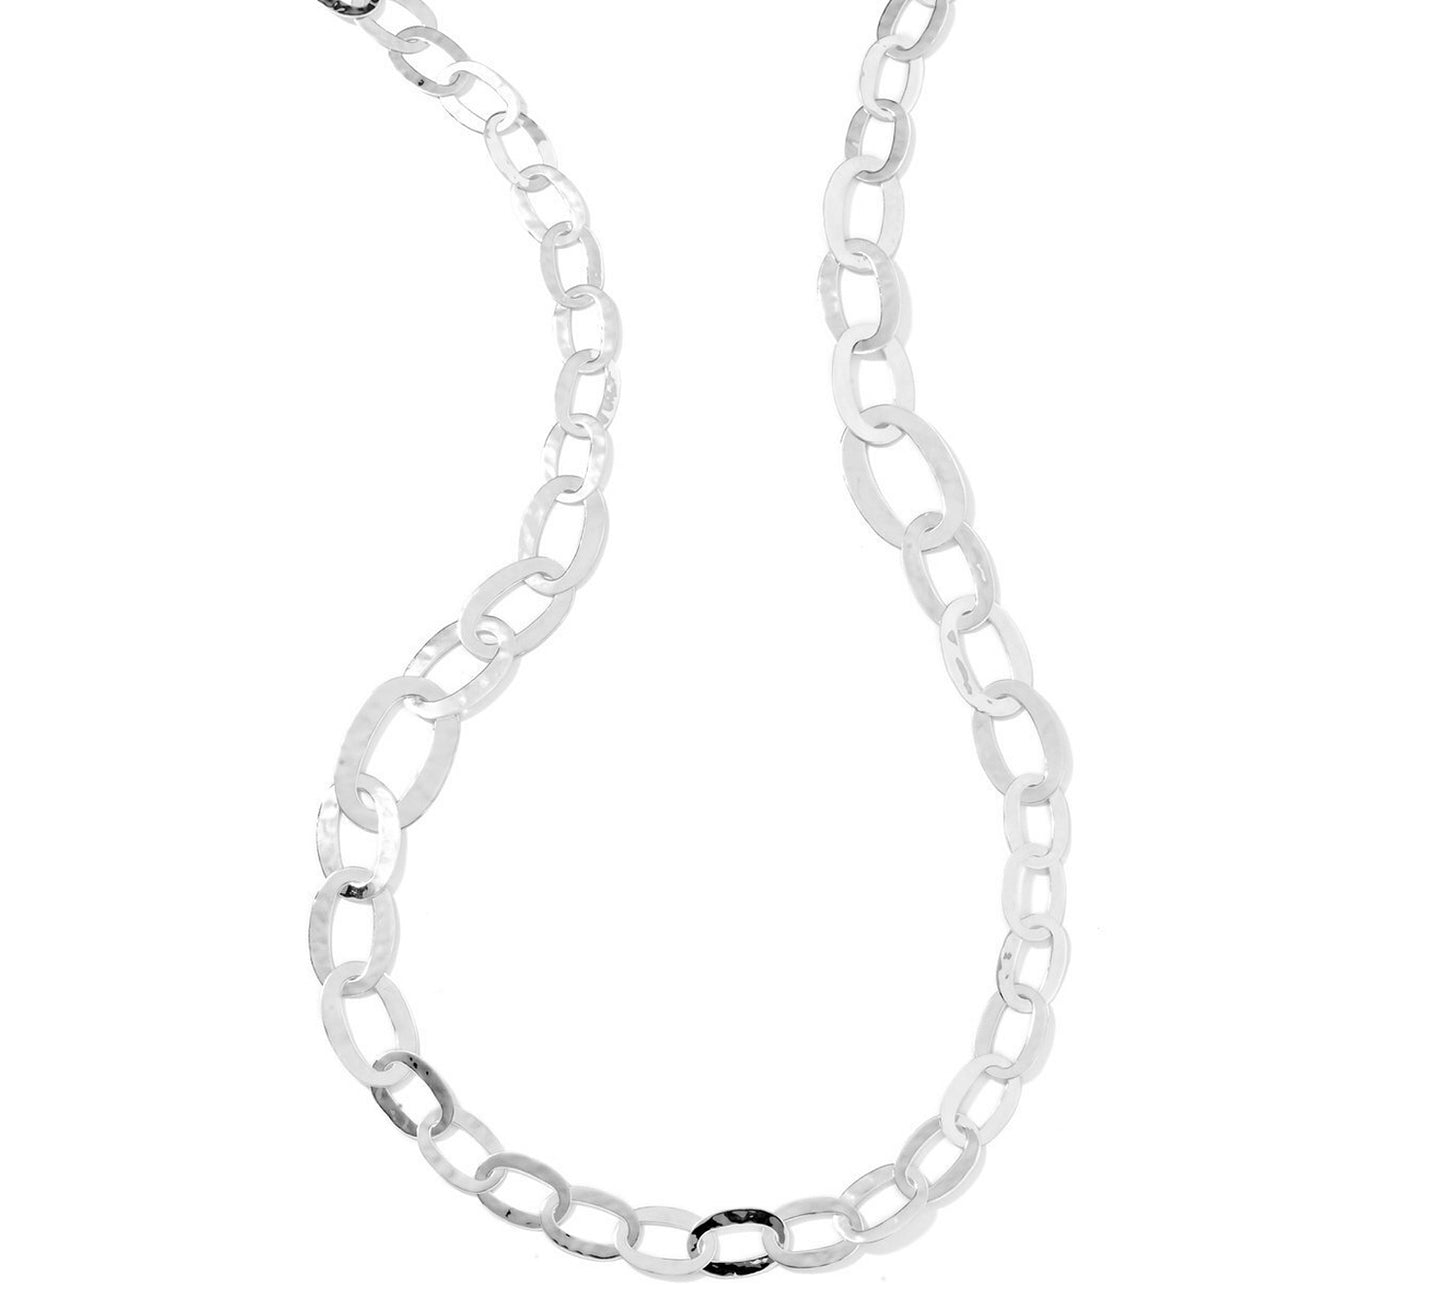 Classico Roma Links Long Necklace in Sterling Silver